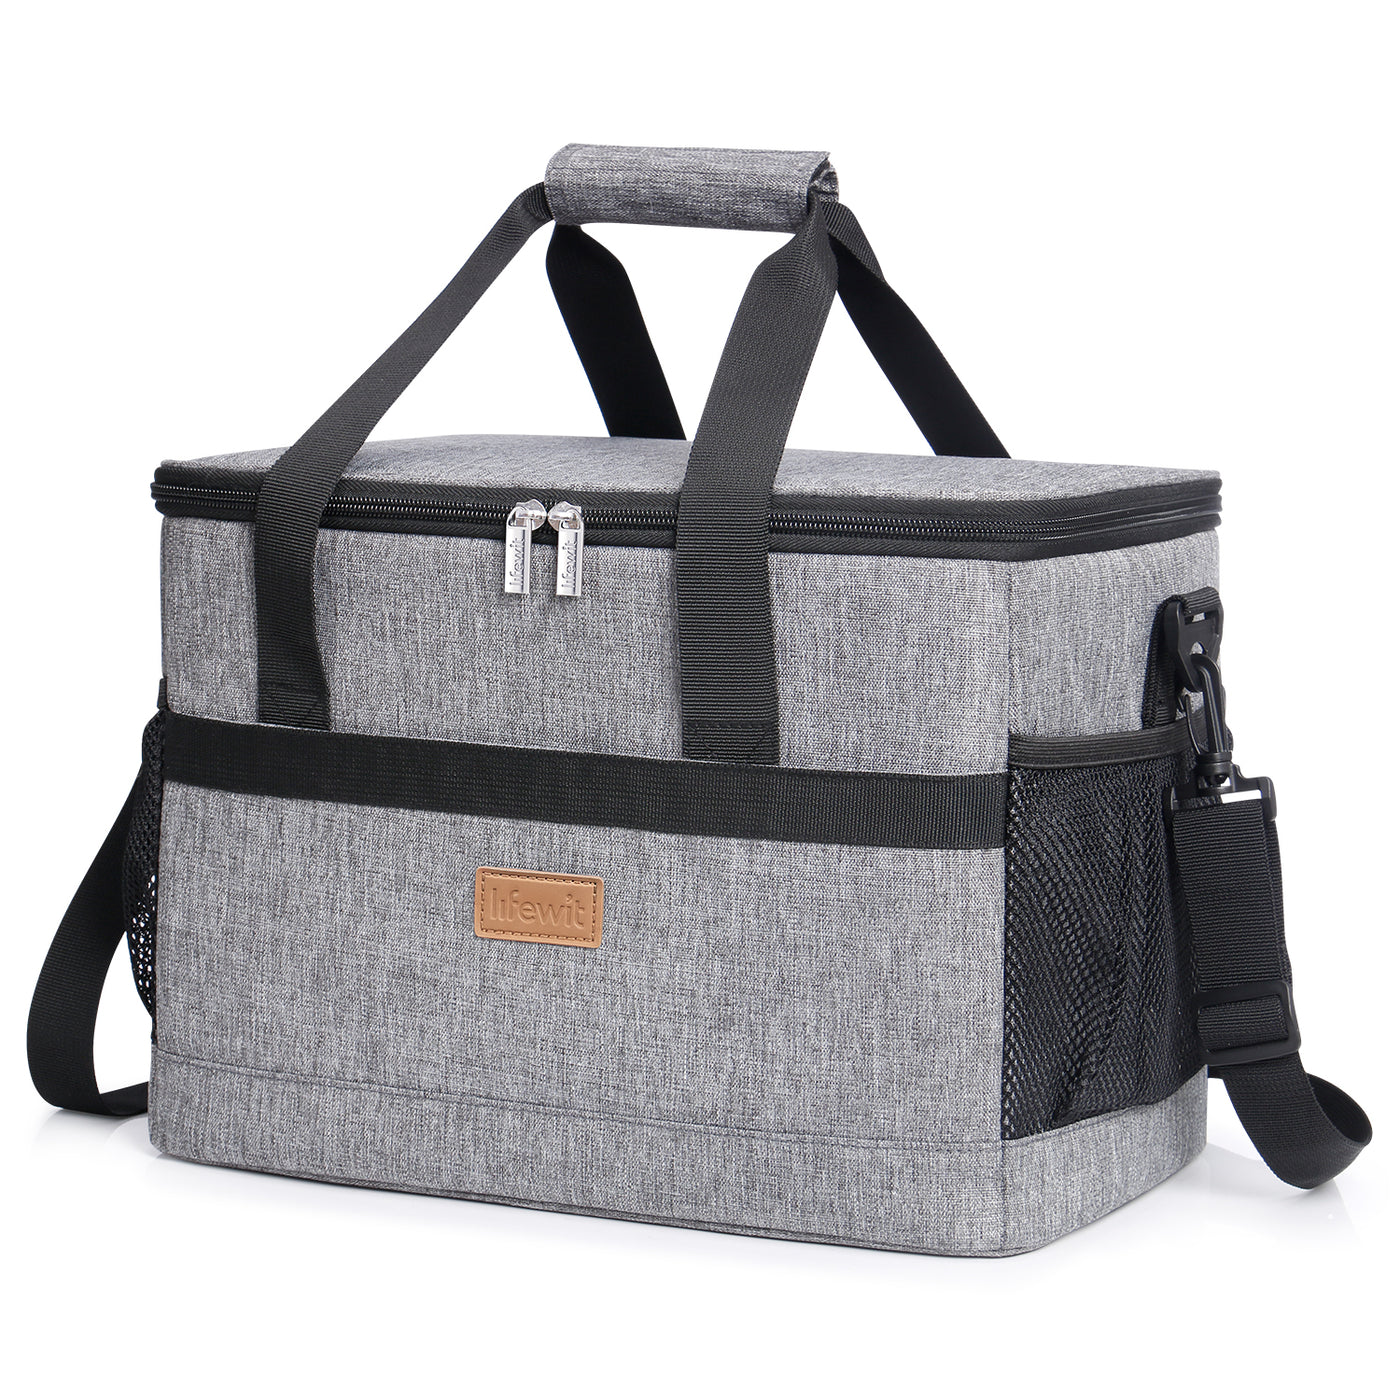 Large Lunch Cooler Bag with Shoulder Strap - Lifewit – Lifewitstore